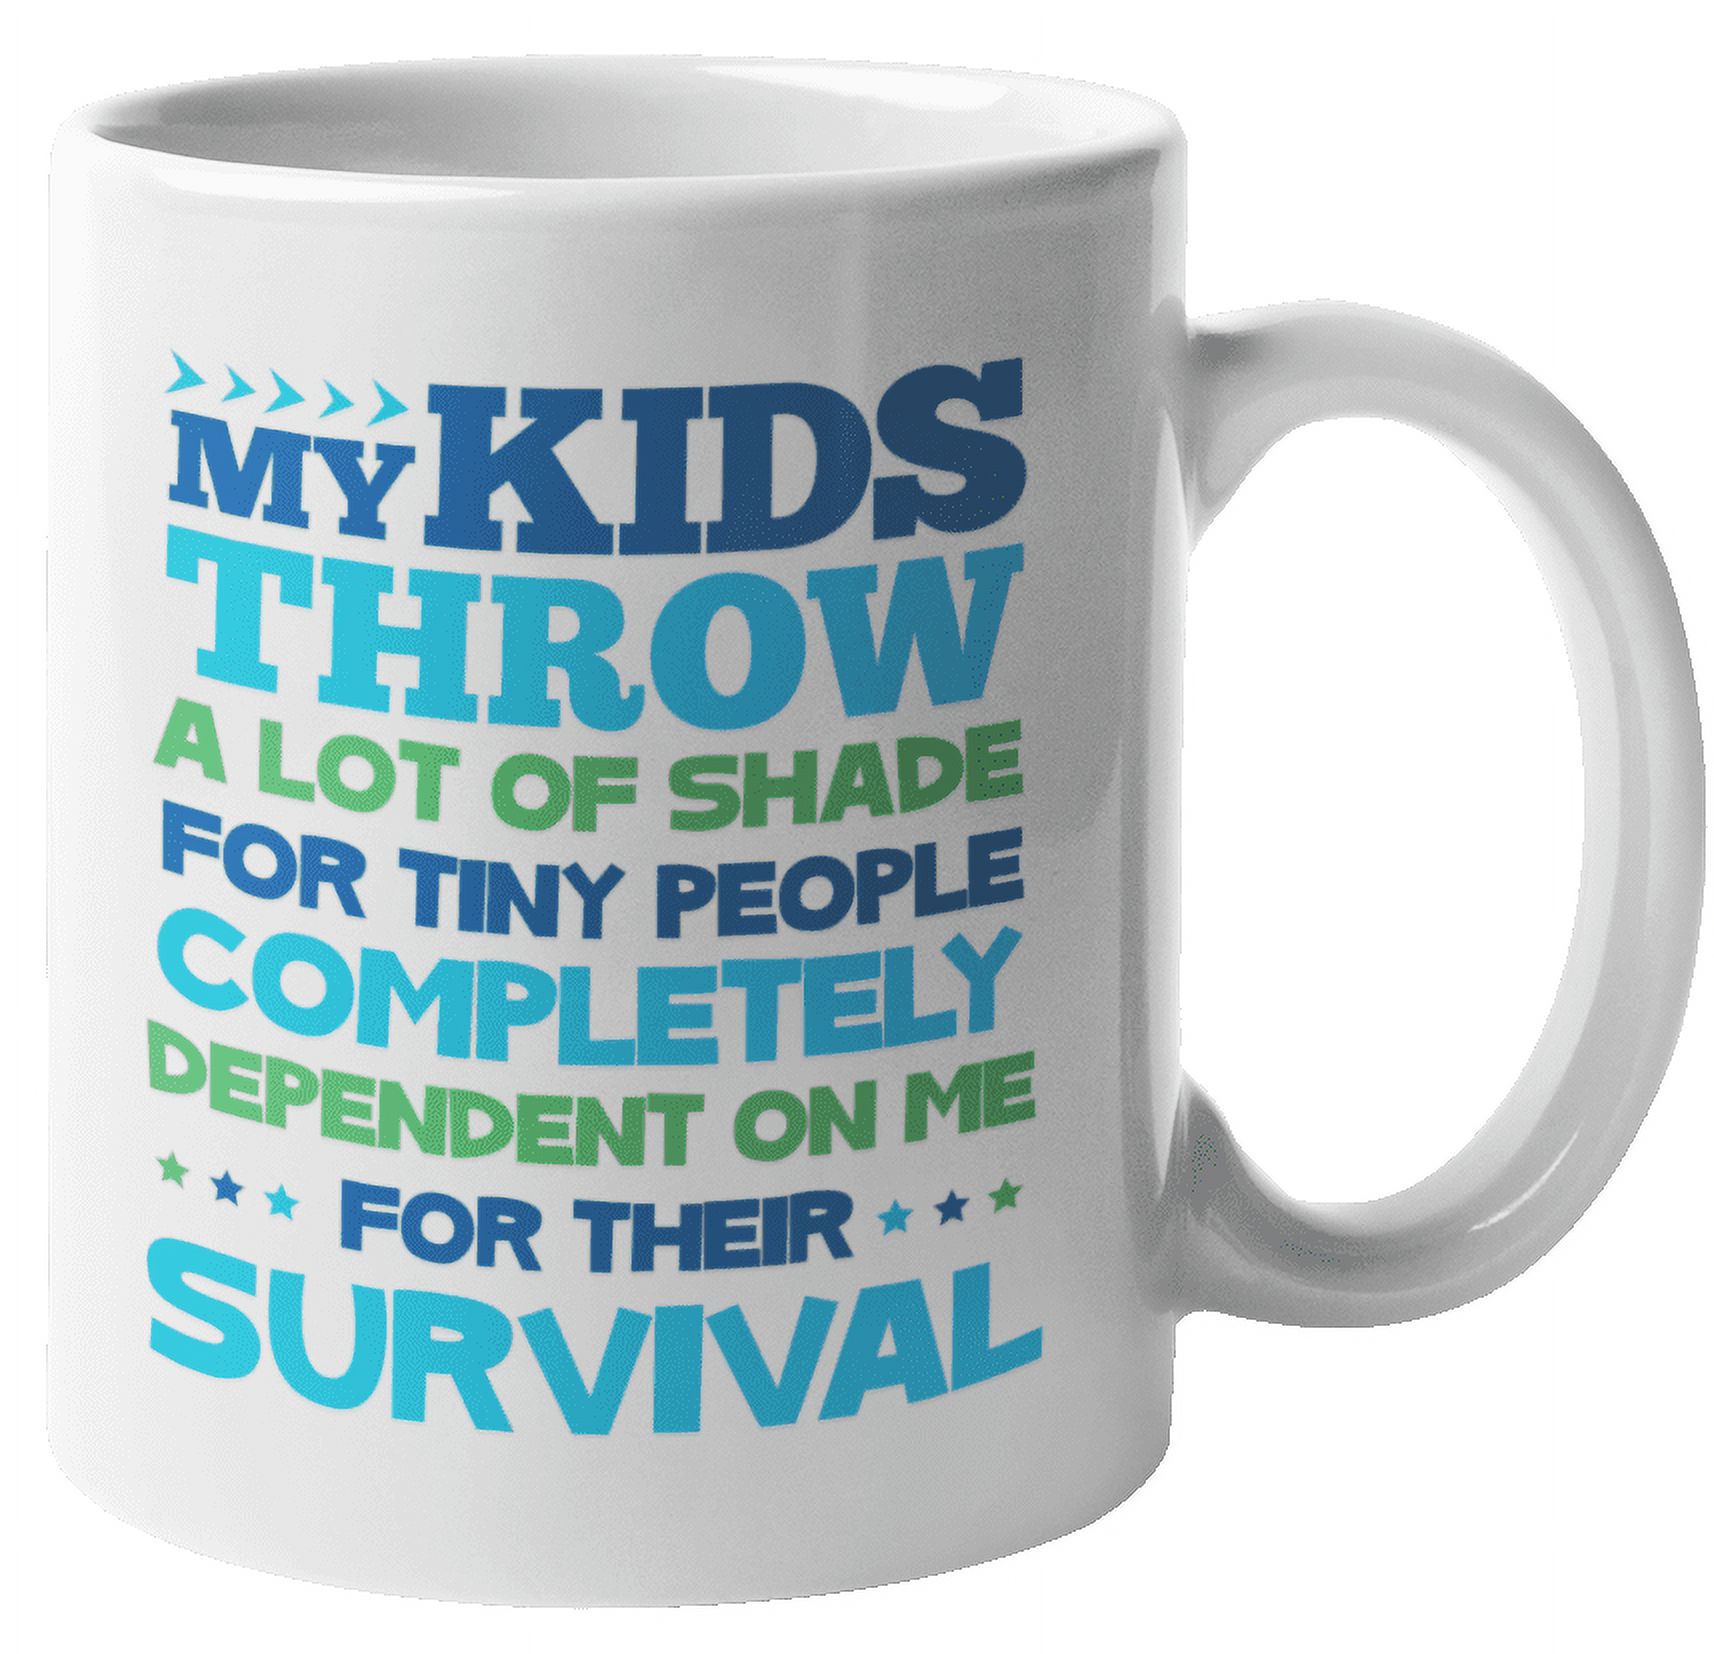 My Kids Throw A Lot Of Shade. Funny Coffee & Tea Mug For Mom, Dad, Mother, Father, Mama, Papa, Step Mom, Step Dad, Auntie, Uncle, Brother, Sister, Women And Men (11oz) - image 1 of 4